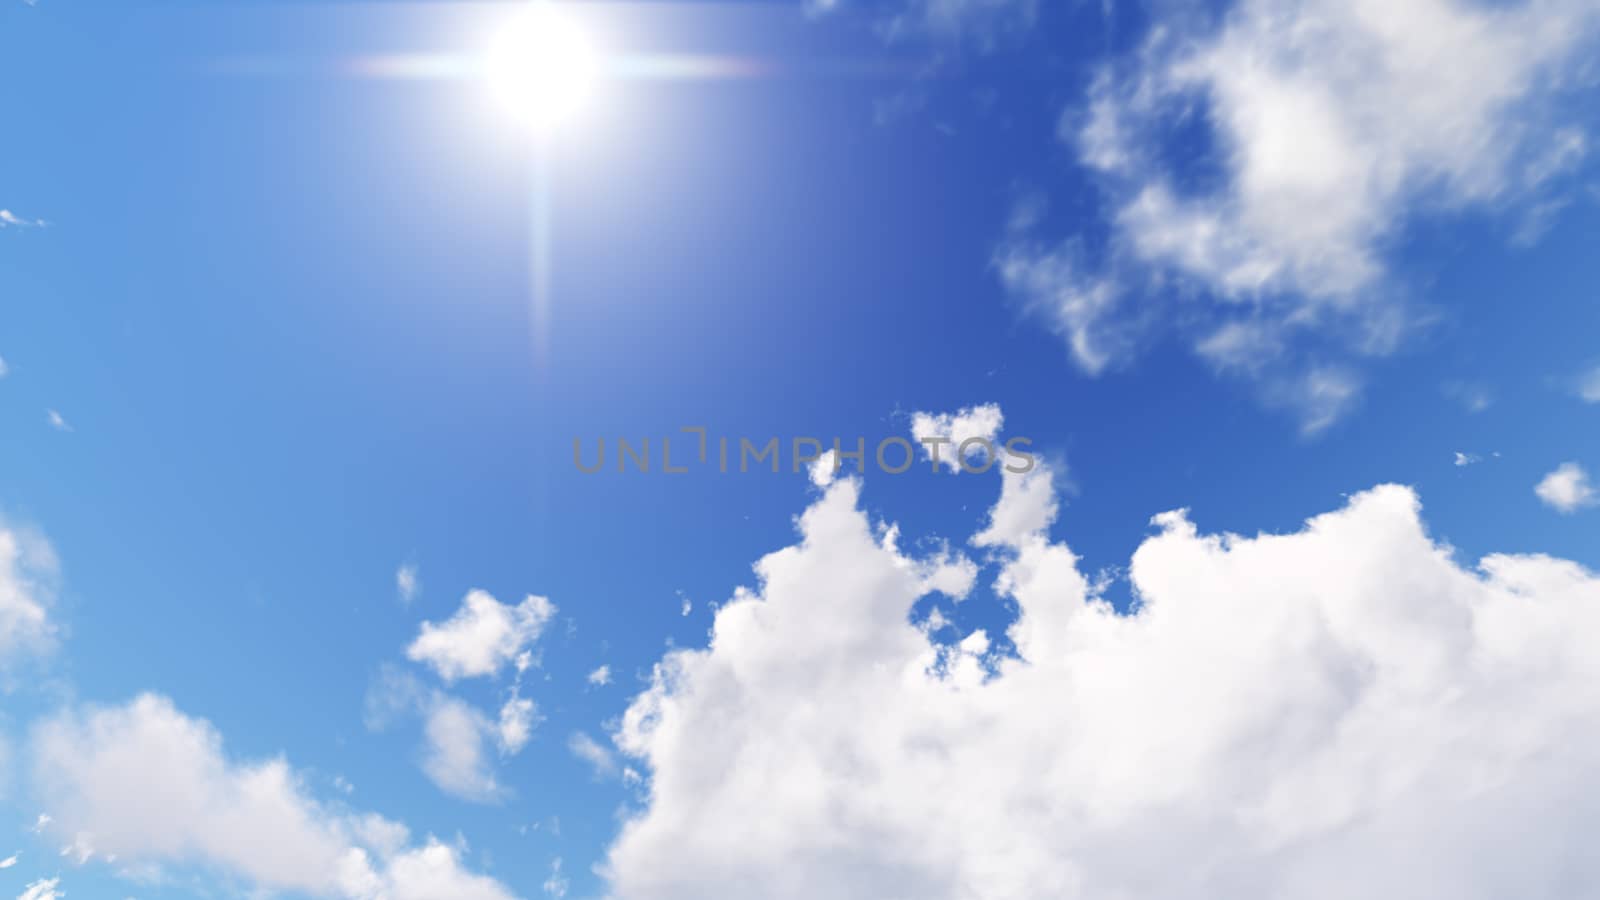 Cloudy blue sky abstract background, blue sky background with tiny clouds, 3d illustration, not a photograph